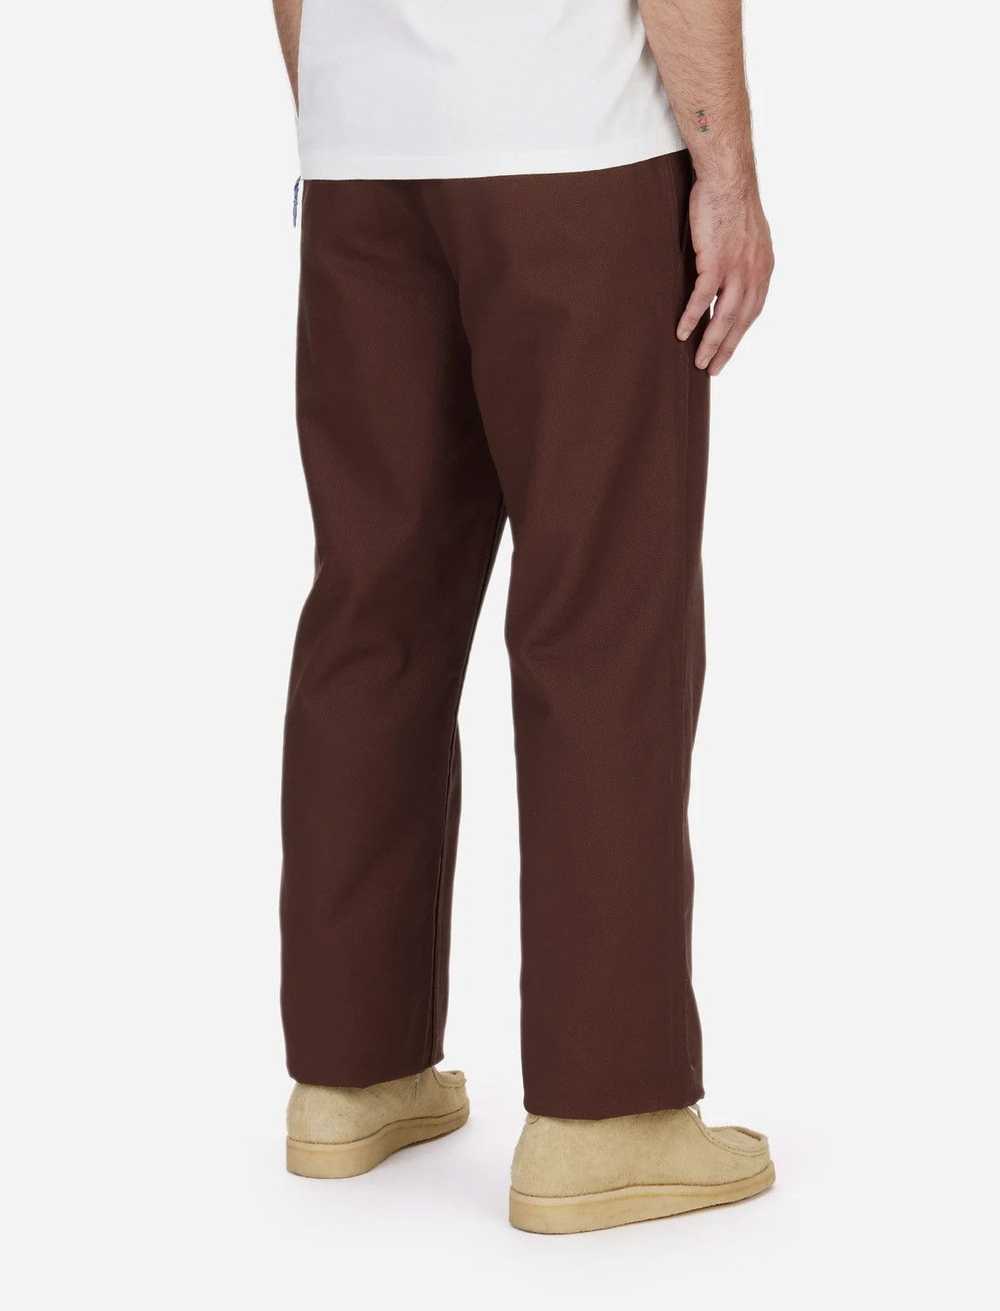 3sixteen Work Pant in Espresso Twill - image 3